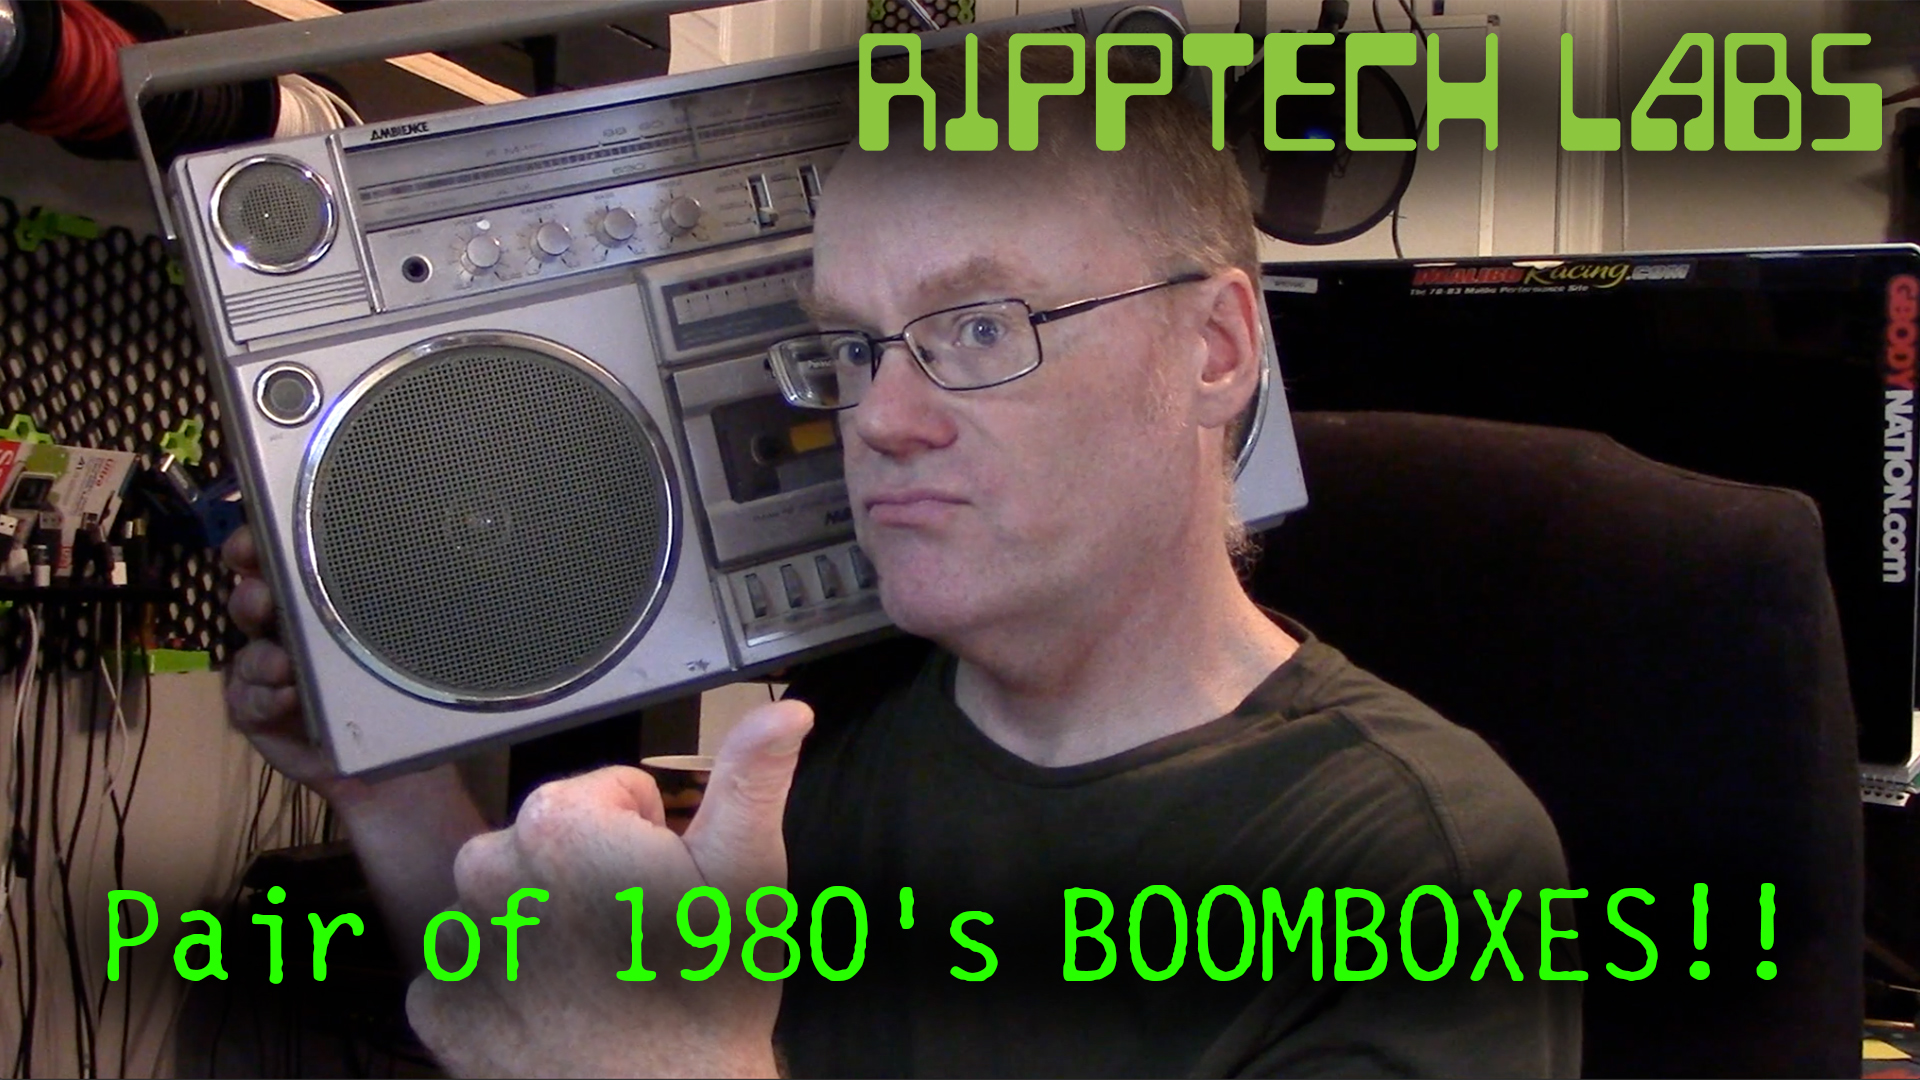 Video: A Pair of Early 1980's Boomboxes! - Panasonic 5150 and Sears 57H2192